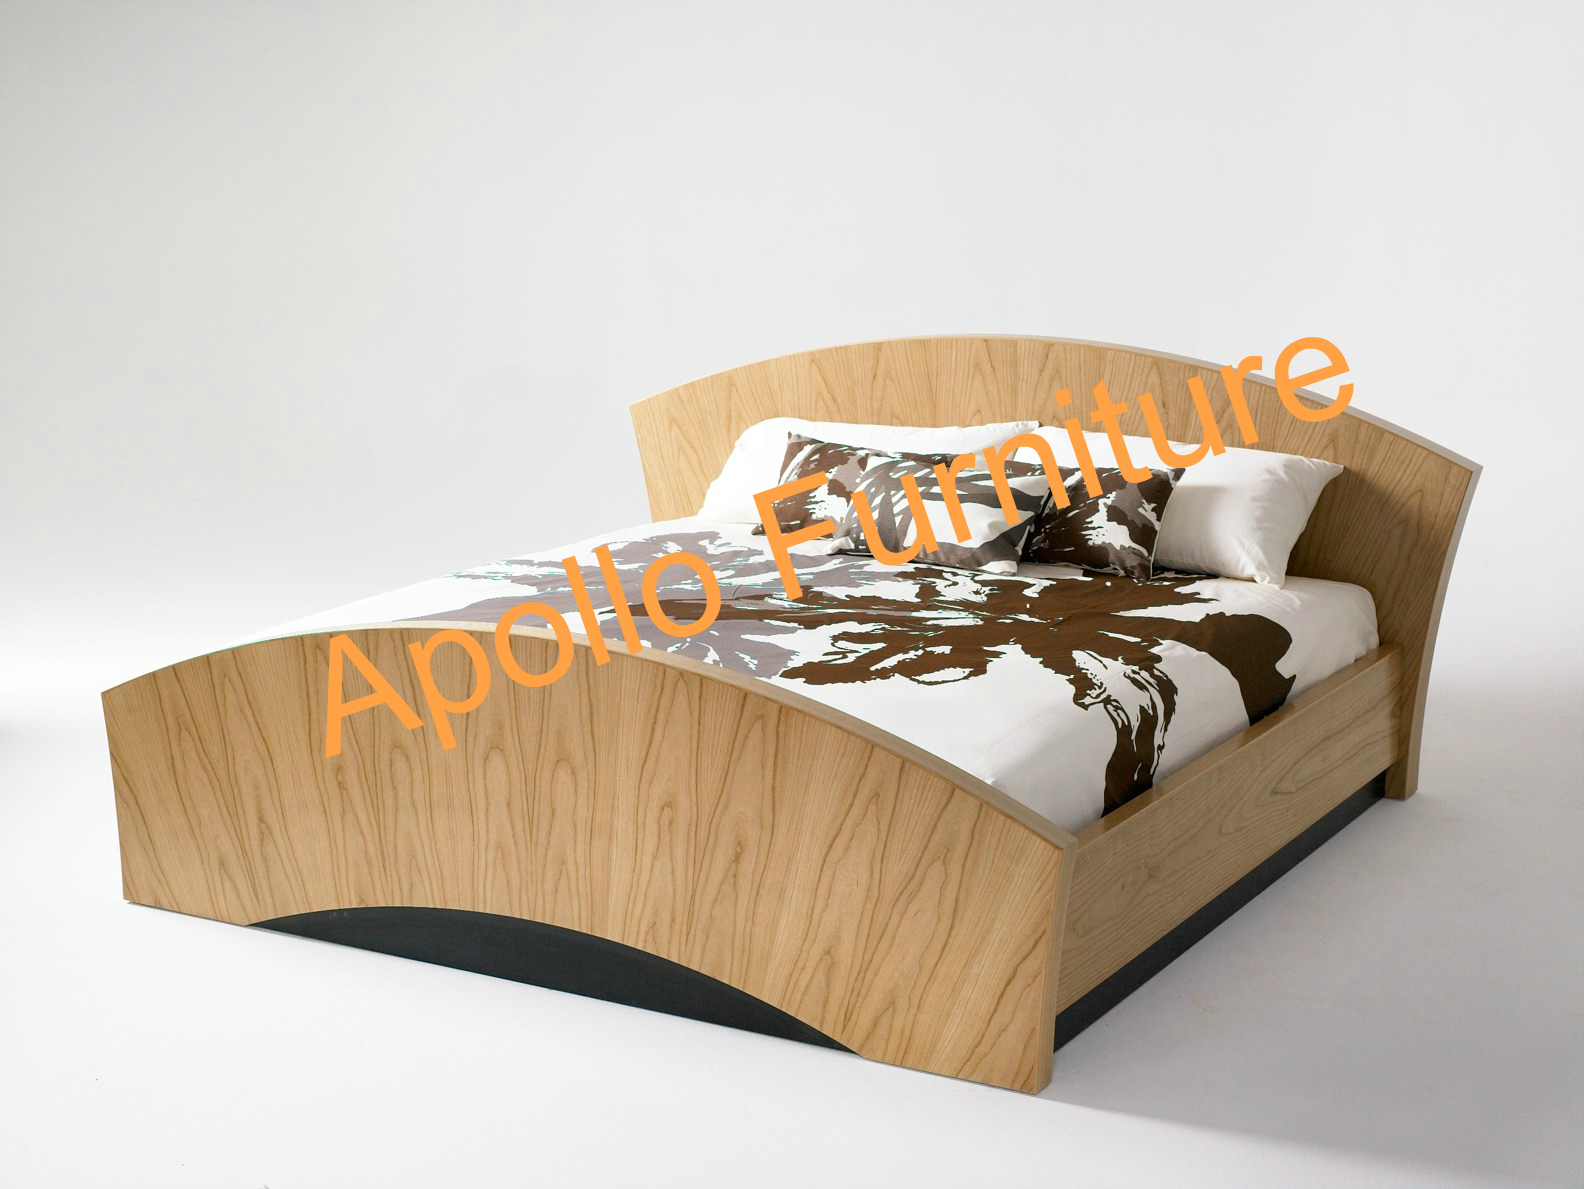 Apollo Furniture-Bed | ClickBD large image 0